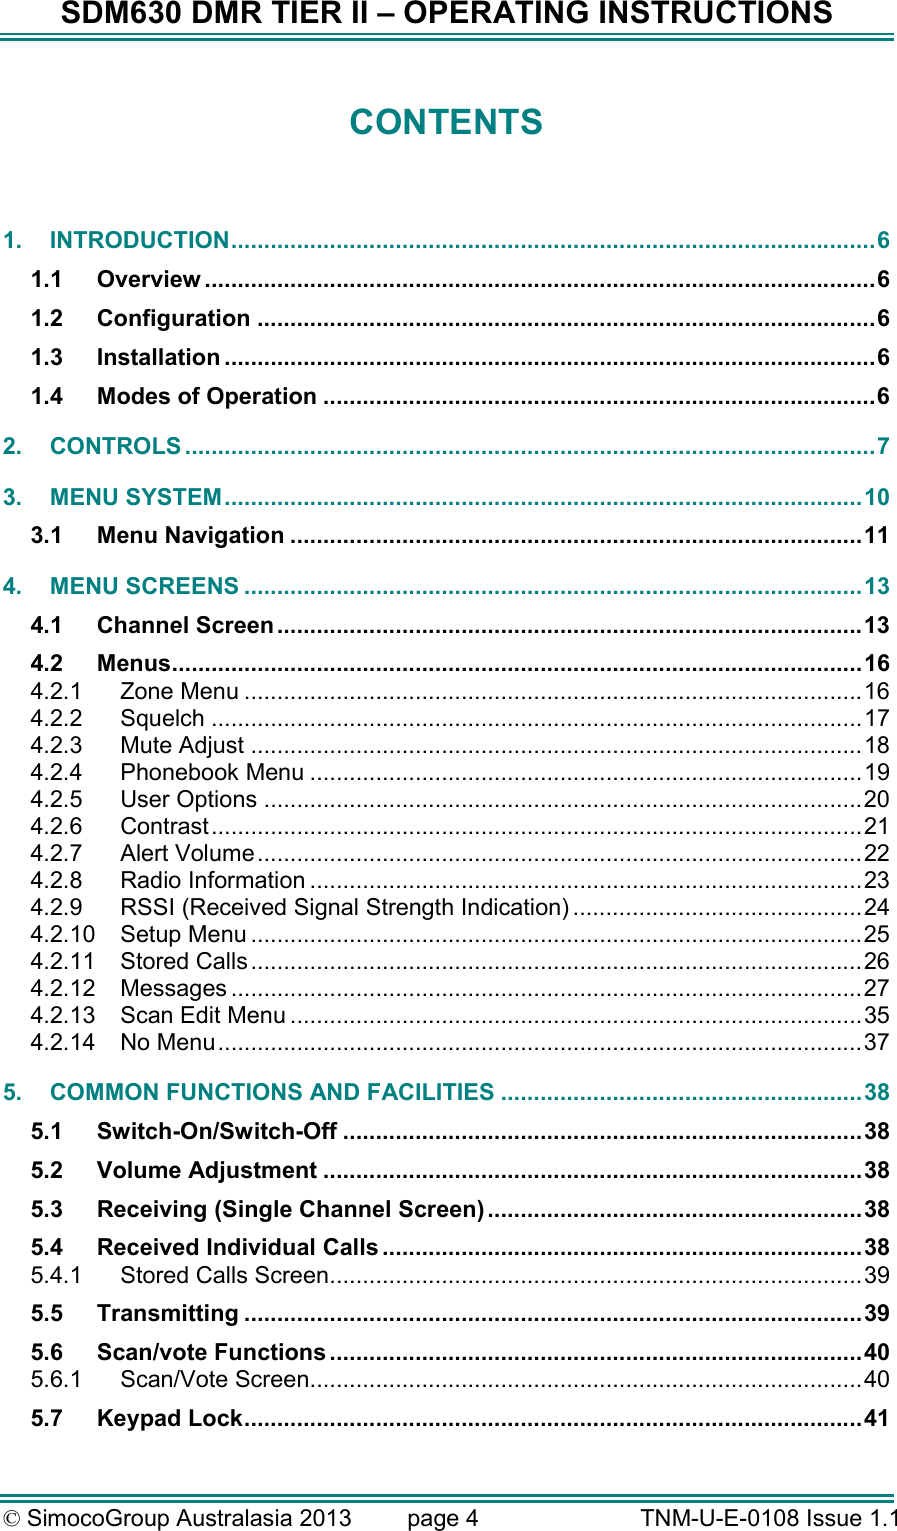 SDM630 DMR TIER II – OPERATING INSTRUCTIONS © SimocoGroup Australasia 2013   page 4   TNM-U-E-0108 Issue 1.1 CONTENTS   1. INTRODUCTION..................................................................................................6 1.1 Overview ......................................................................................................6 1.2 Configuration ..............................................................................................6 1.3 Installation ...................................................................................................6 1.4 Modes of Operation ....................................................................................6 2. CONTROLS .........................................................................................................7 3. MENU SYSTEM.................................................................................................10 3.1 Menu Navigation .......................................................................................11 4. MENU SCREENS ..............................................................................................13 4.1 Channel Screen.........................................................................................13 4.2 Menus.........................................................................................................16 4.2.1 Zone Menu ..............................................................................................16 4.2.2 Squelch ...................................................................................................17 4.2.3 Mute Adjust .............................................................................................18 4.2.4 Phonebook Menu ....................................................................................19 4.2.5 User Options ...........................................................................................20 4.2.6 Contrast...................................................................................................21 4.2.7 Alert Volume............................................................................................22 4.2.8 Radio Information ....................................................................................23 4.2.9 RSSI (Received Signal Strength Indication) ............................................24 4.2.10 Setup Menu .............................................................................................25 4.2.11 Stored Calls.............................................................................................26 4.2.12 Messages ................................................................................................27 4.2.13 Scan Edit Menu .......................................................................................35 4.2.14 No Menu..................................................................................................37 5. COMMON FUNCTIONS AND FACILITIES .......................................................38 5.1 Switch-On/Switch-Off ...............................................................................38 5.2 Volume Adjustment ..................................................................................38 5.3 Receiving (Single Channel Screen) .........................................................38 5.4 Received Individual Calls .........................................................................38 5.4.1 Stored Calls Screen.................................................................................39 5.5 Transmitting ..............................................................................................39 5.6 Scan/vote Functions .................................................................................40 5.6.1 Scan/Vote Screen....................................................................................40 5.7 Keypad Lock..............................................................................................41 